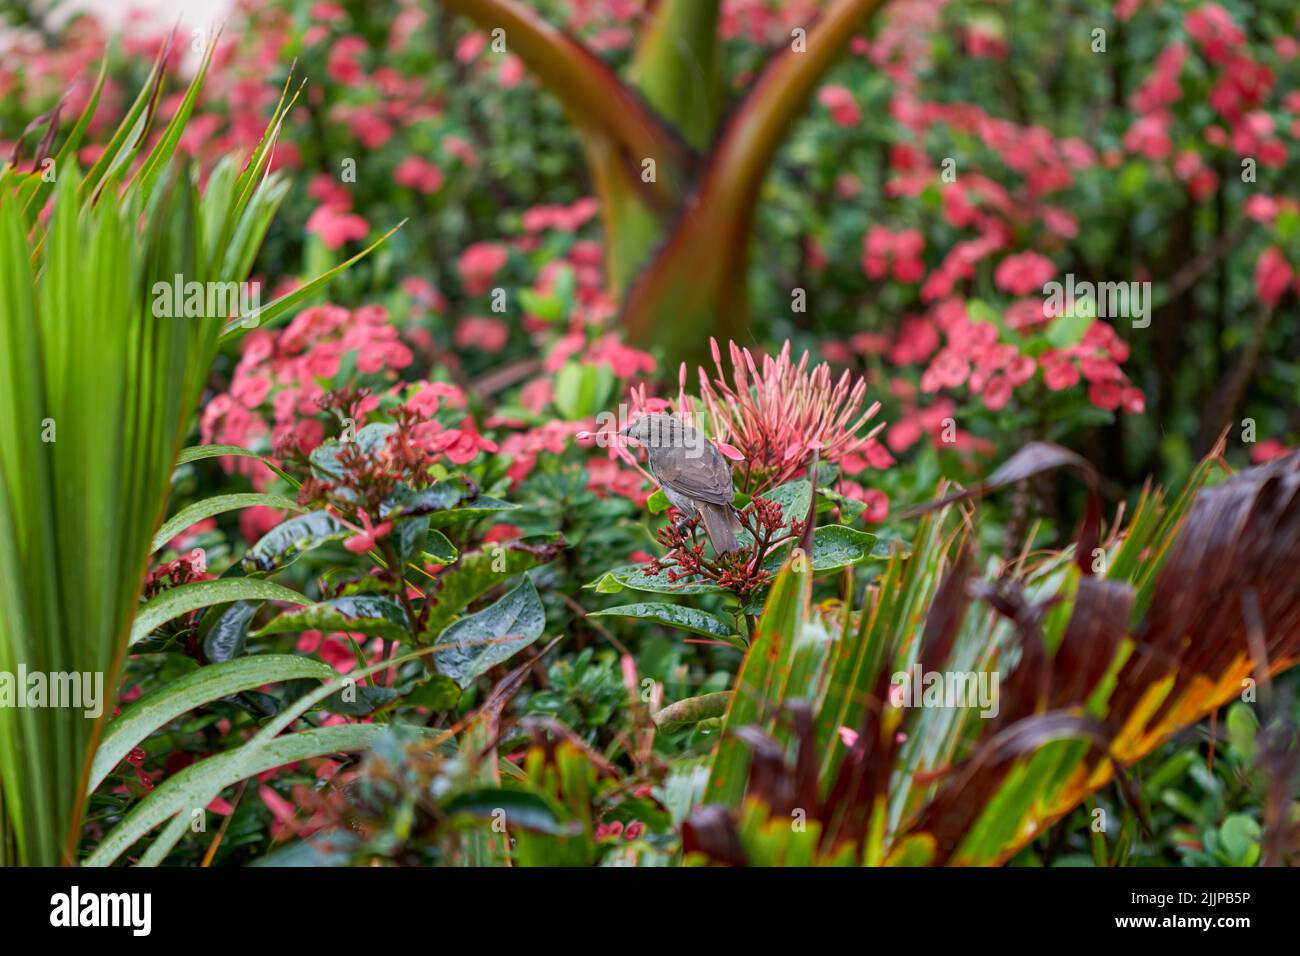 A cute little Myzomela sitting on an exotic flower plant. Stock Photo